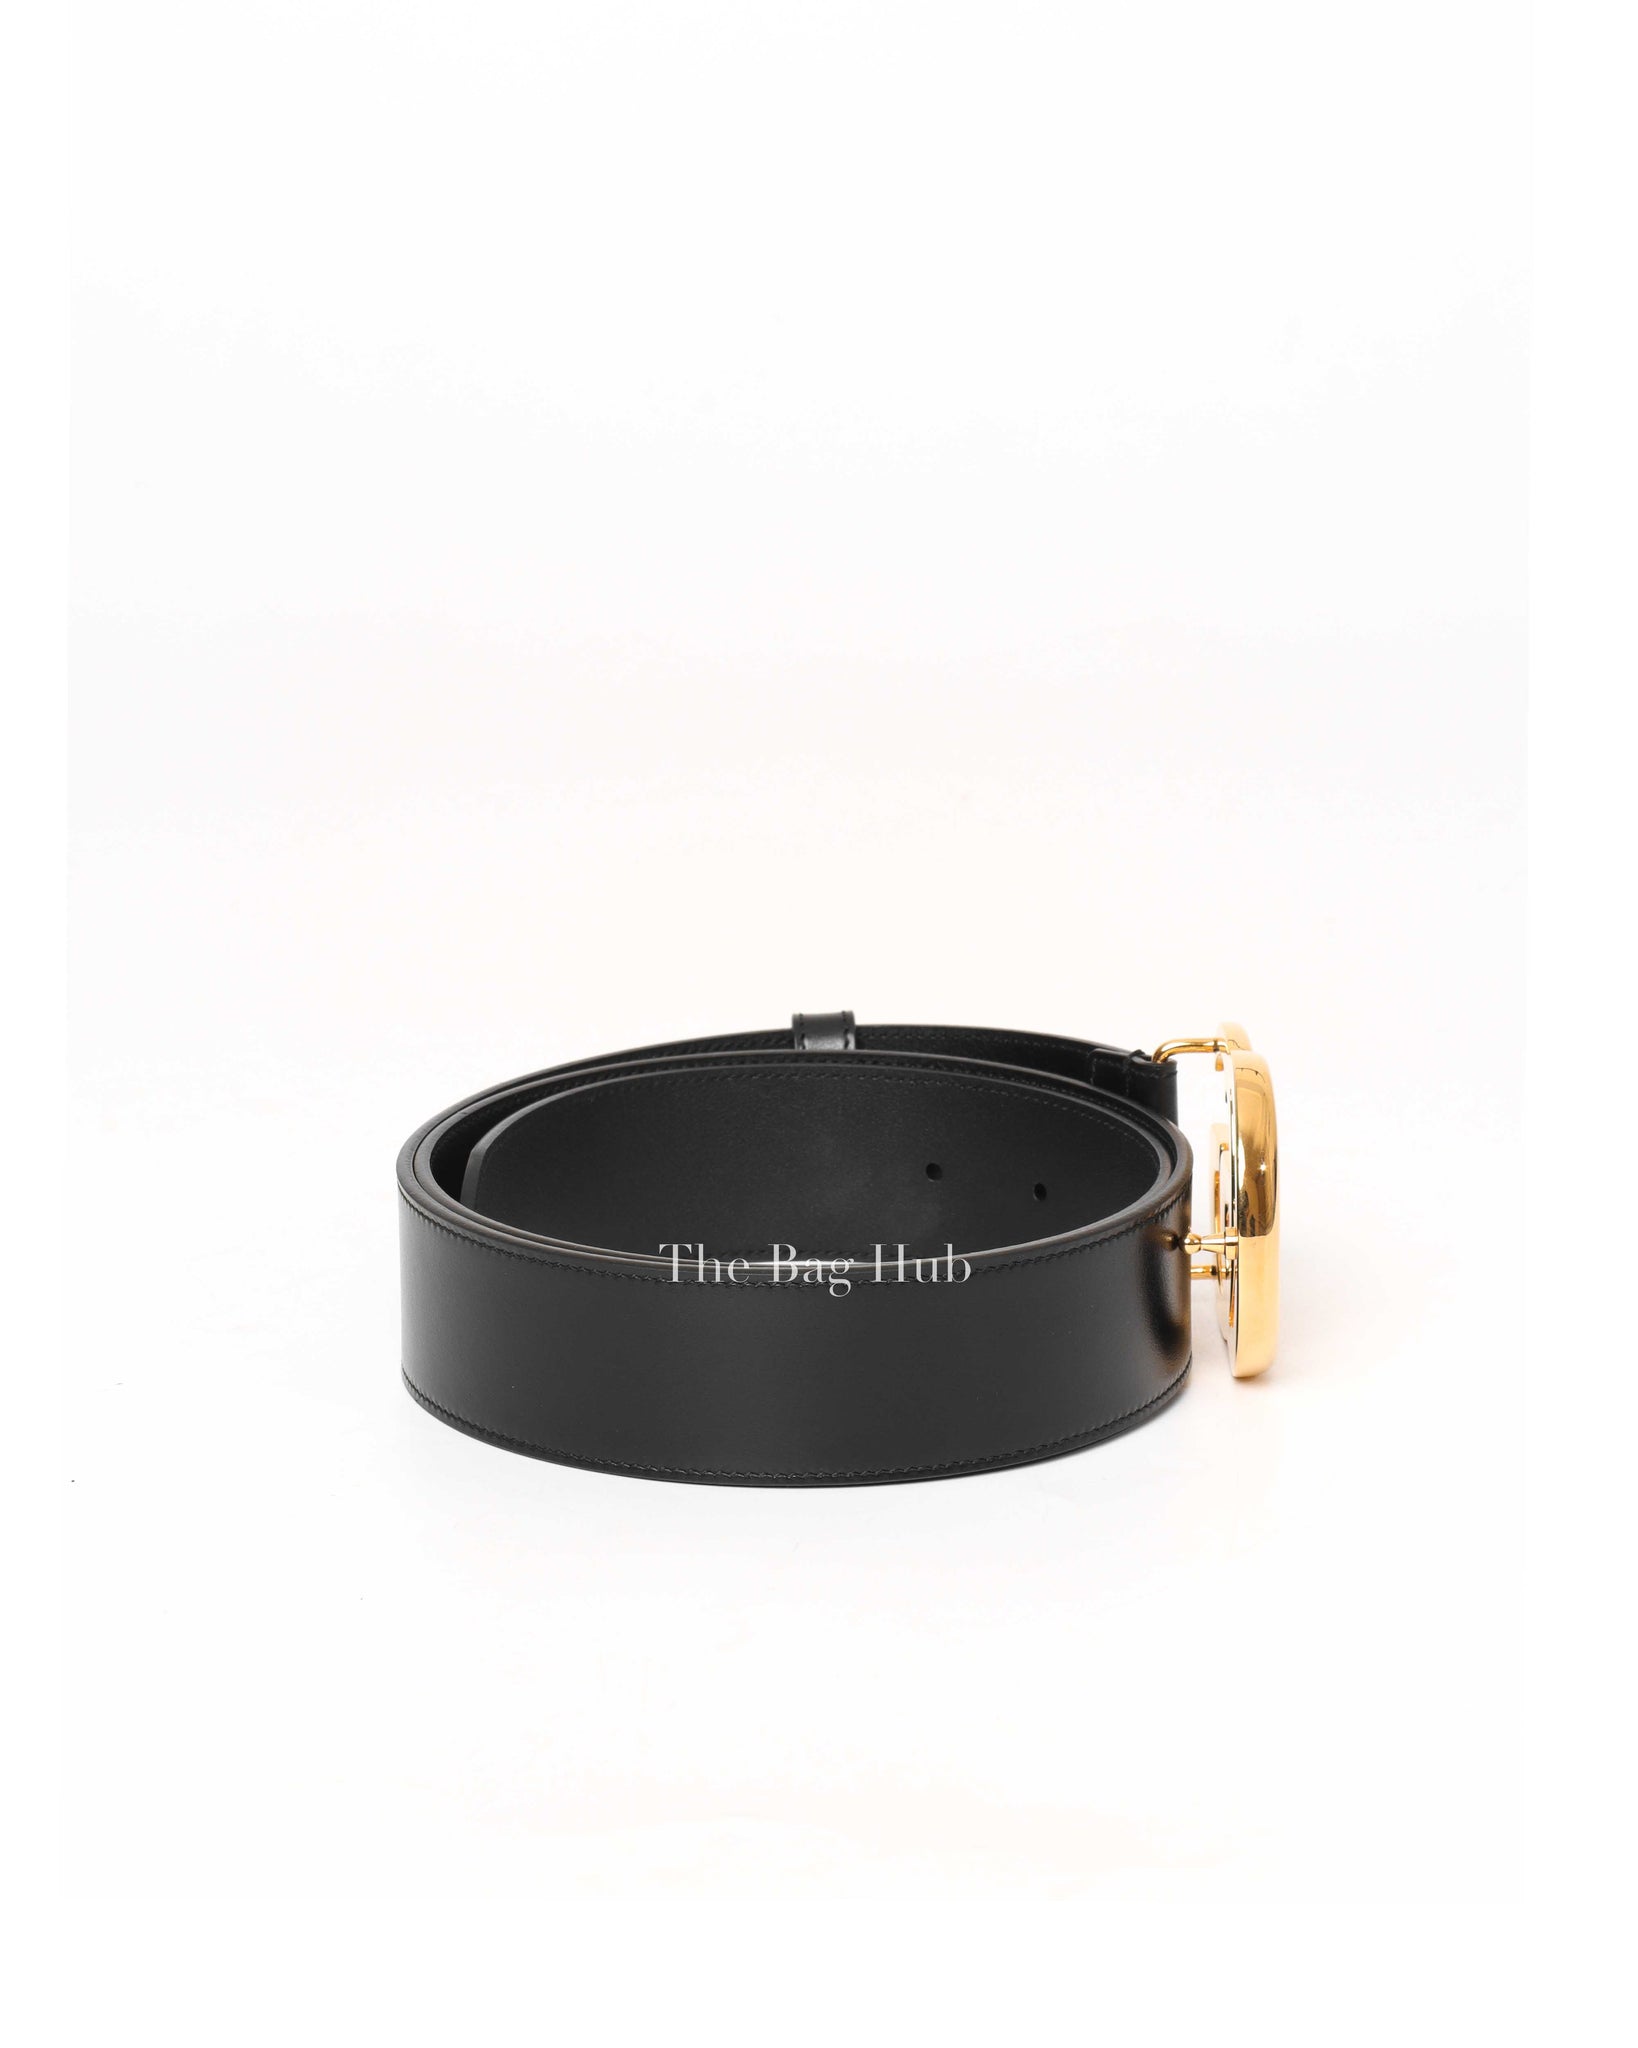 Gucci Black Leather GG Marmont Shiny Buckle Belt 95/38-5